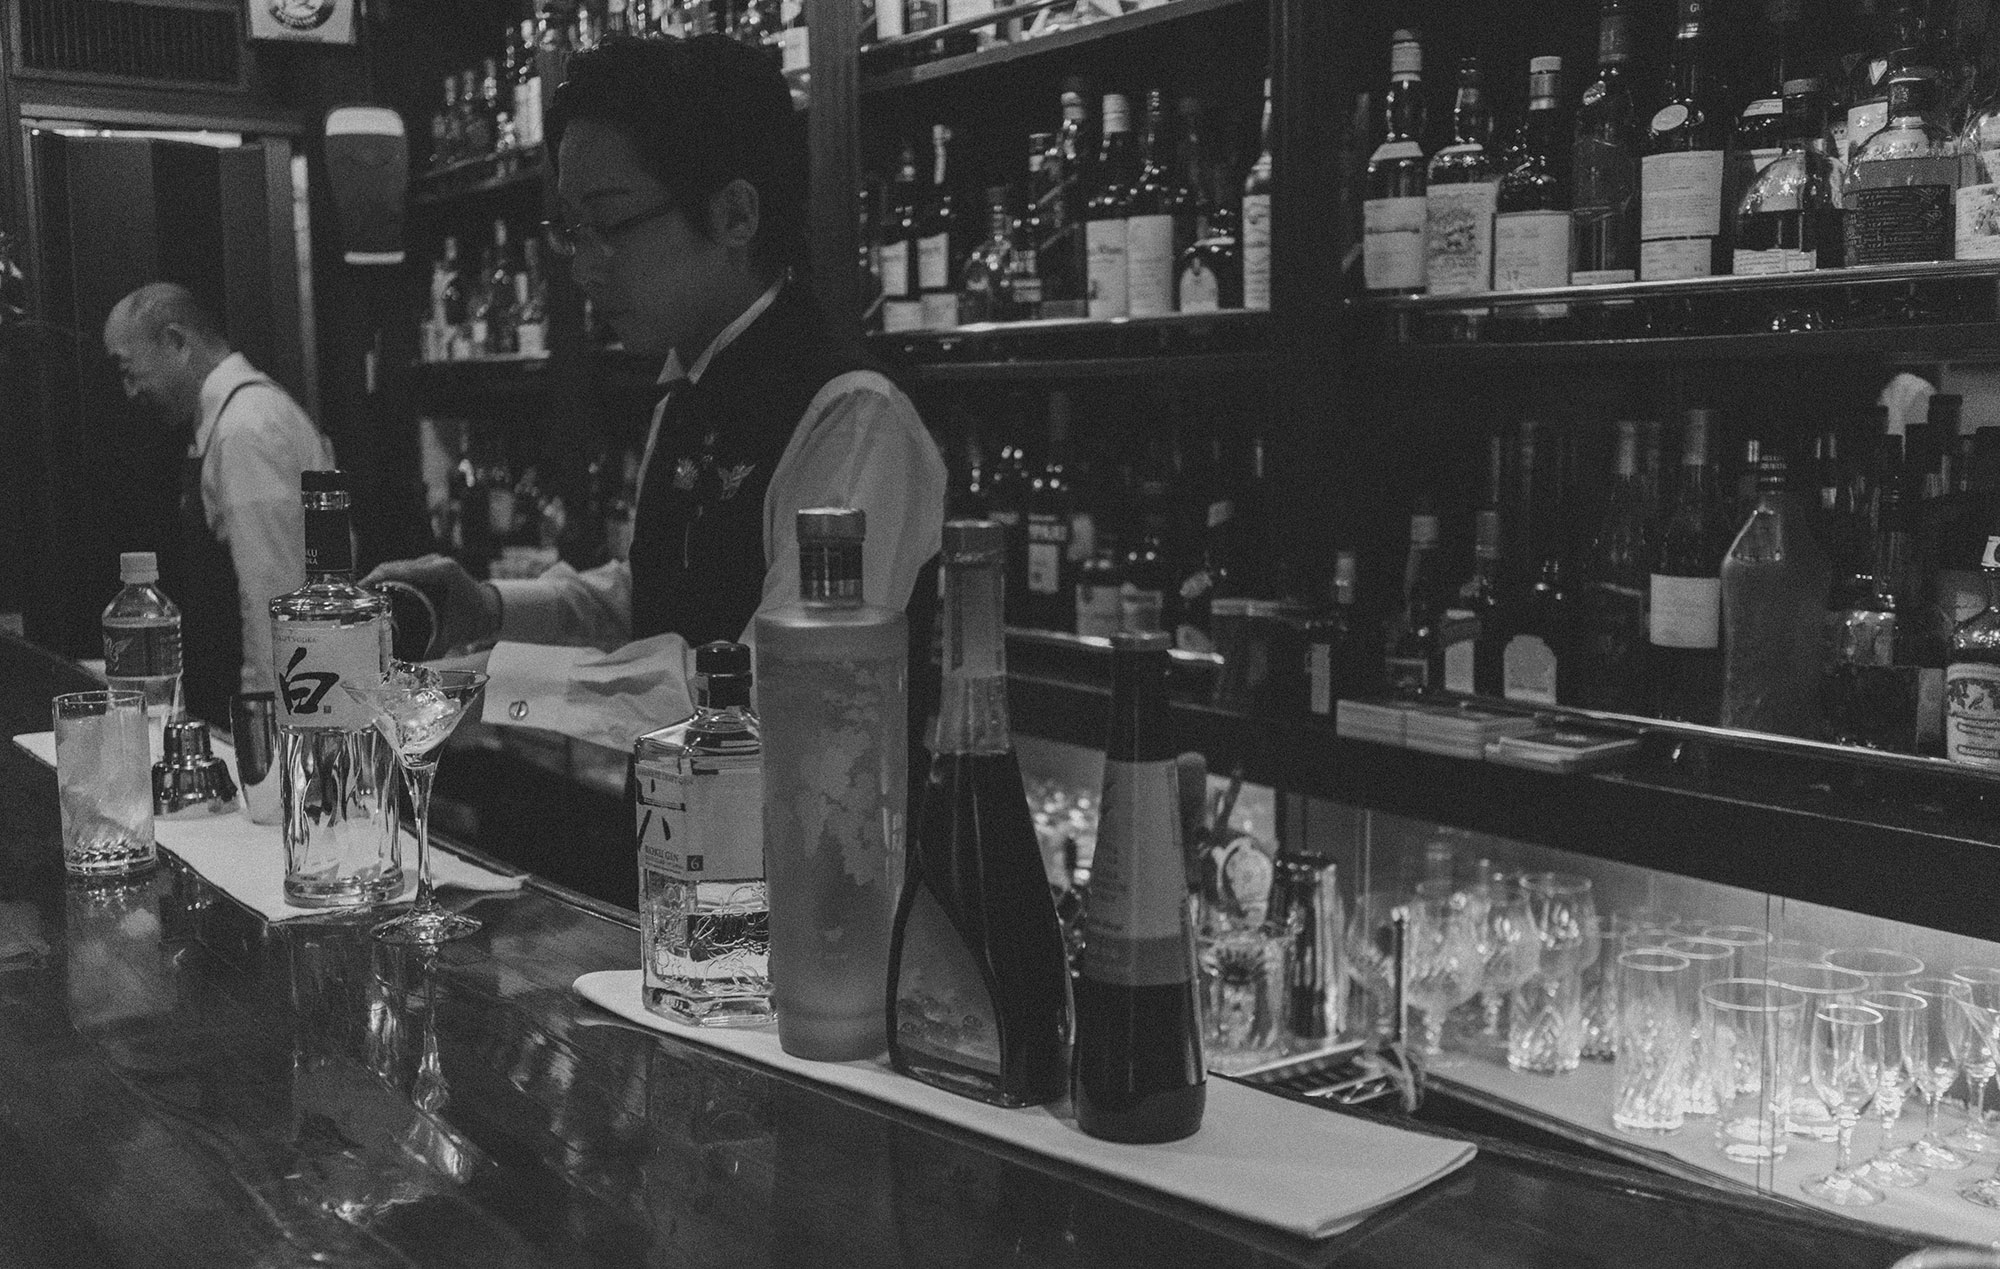 Tokyo Bar Guide w/ Haku Vodka - 5 Bars to have a drink in Tokyo / iHeartAlice.com - Travel, Lifestyle & Foodblog by Alice M. Huynh / Tokyo Travel Guide